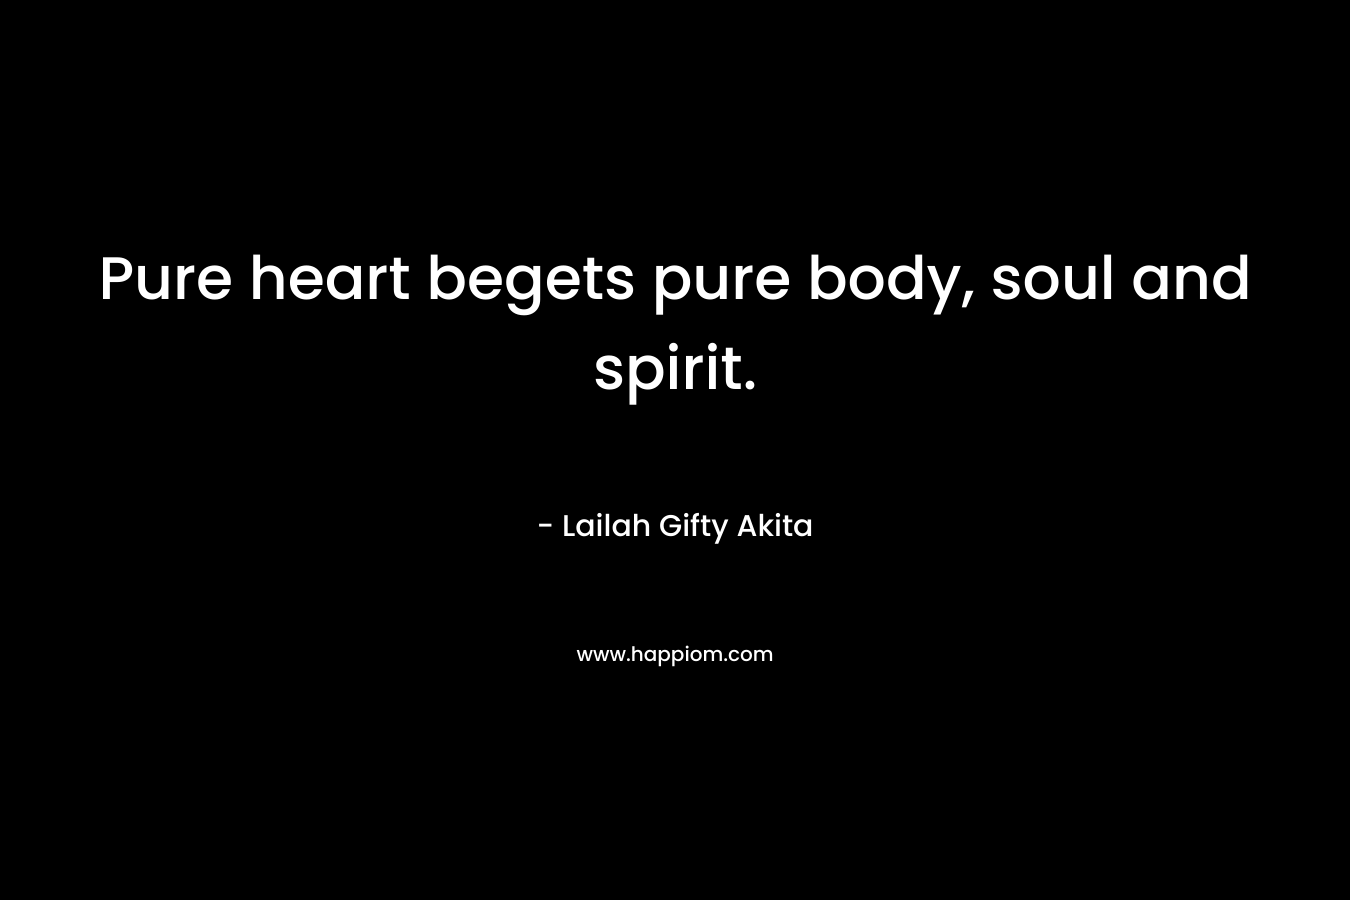 Pure heart begets pure body, soul and spirit.